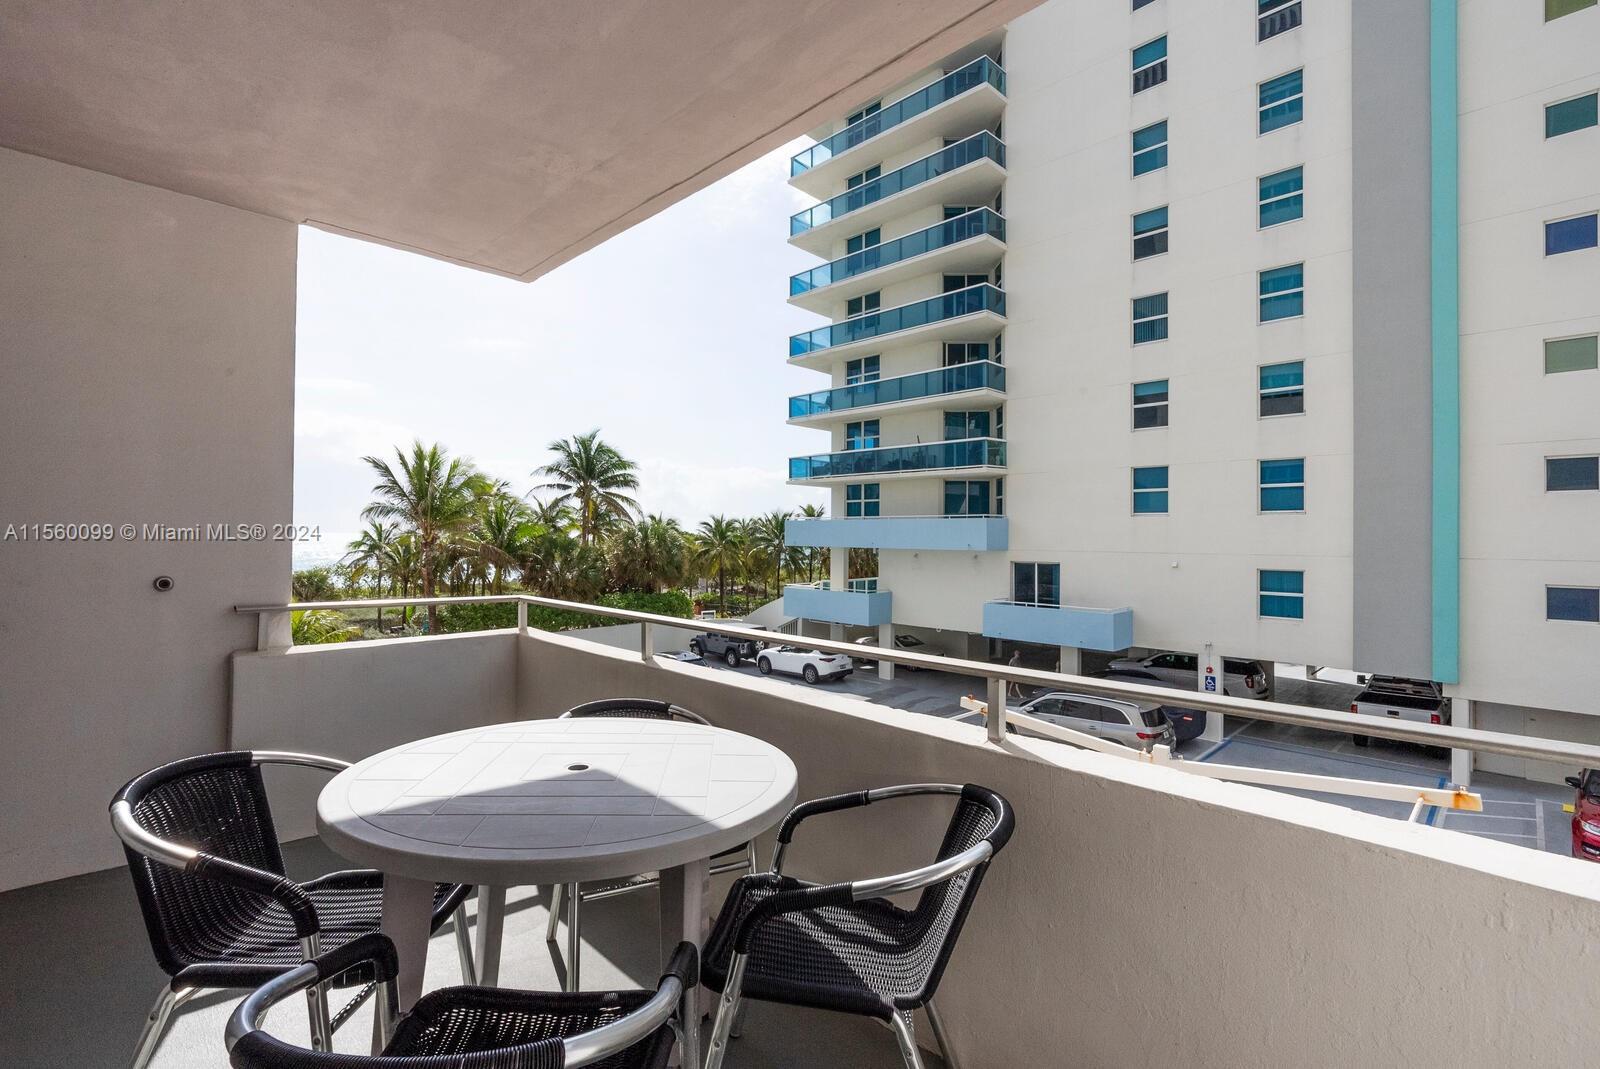 Photo of 9225 Collins Ave #304 in Surfside, FL